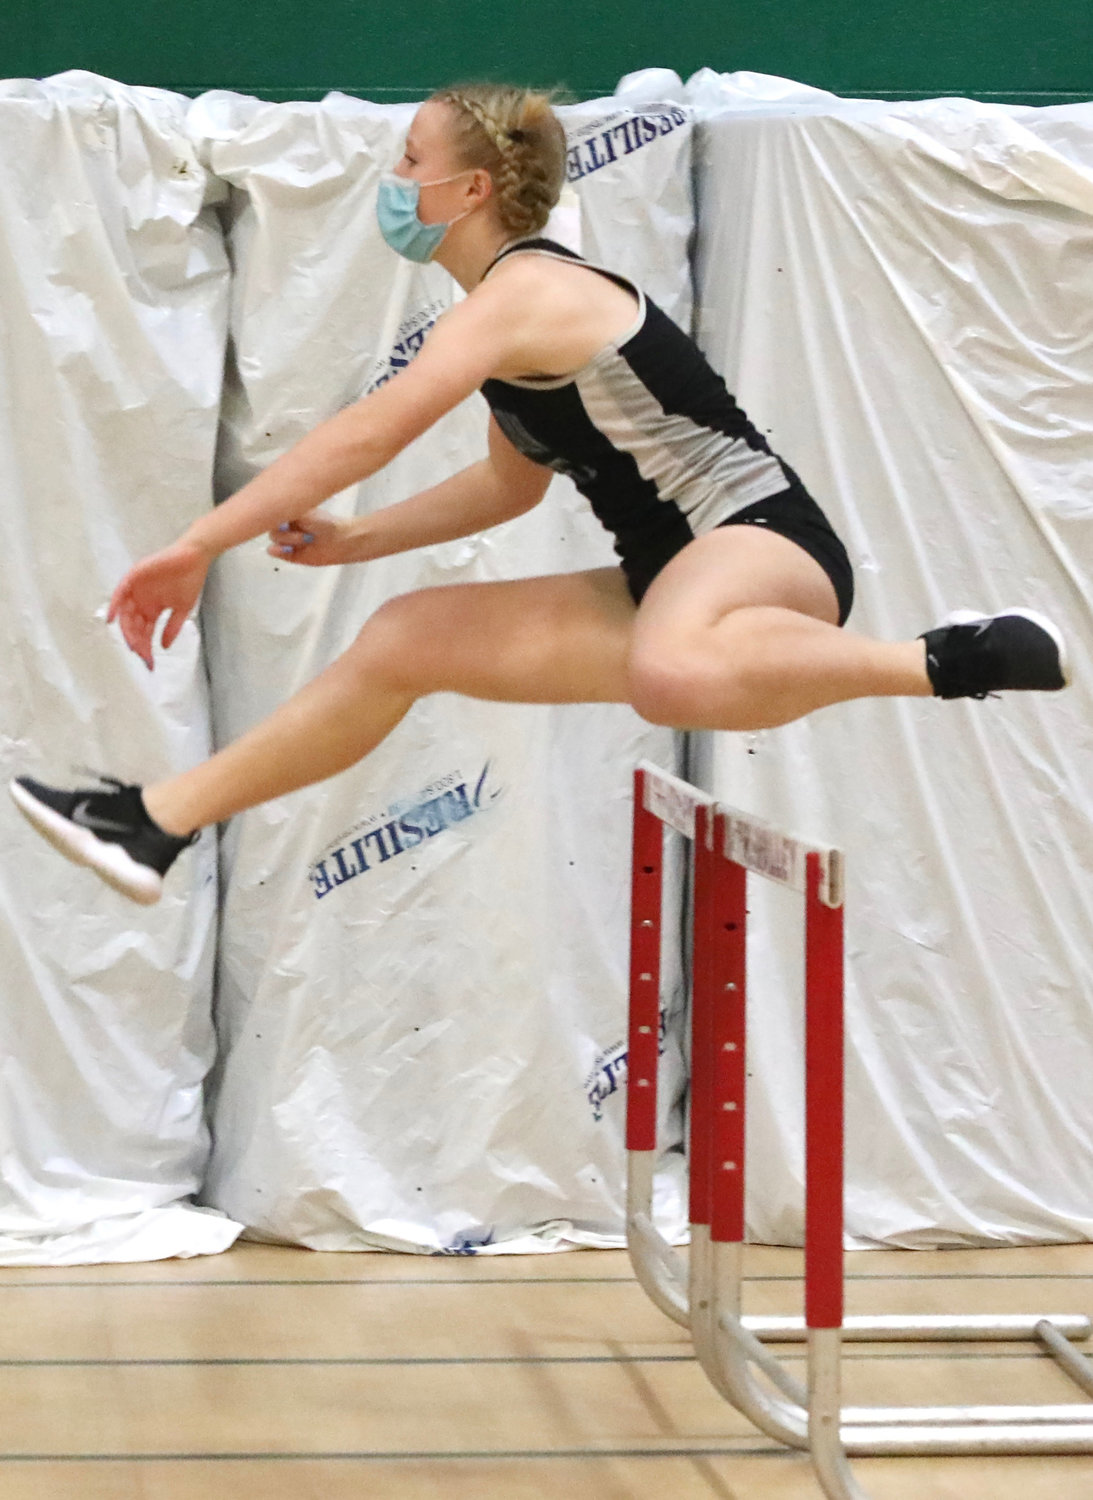 Sullivan West’s Keely Schock leaps over the 55 hurdles with good form. She followed Monticello’s Taina DeJesus, the county’s best hurdler emulating her style and technique.